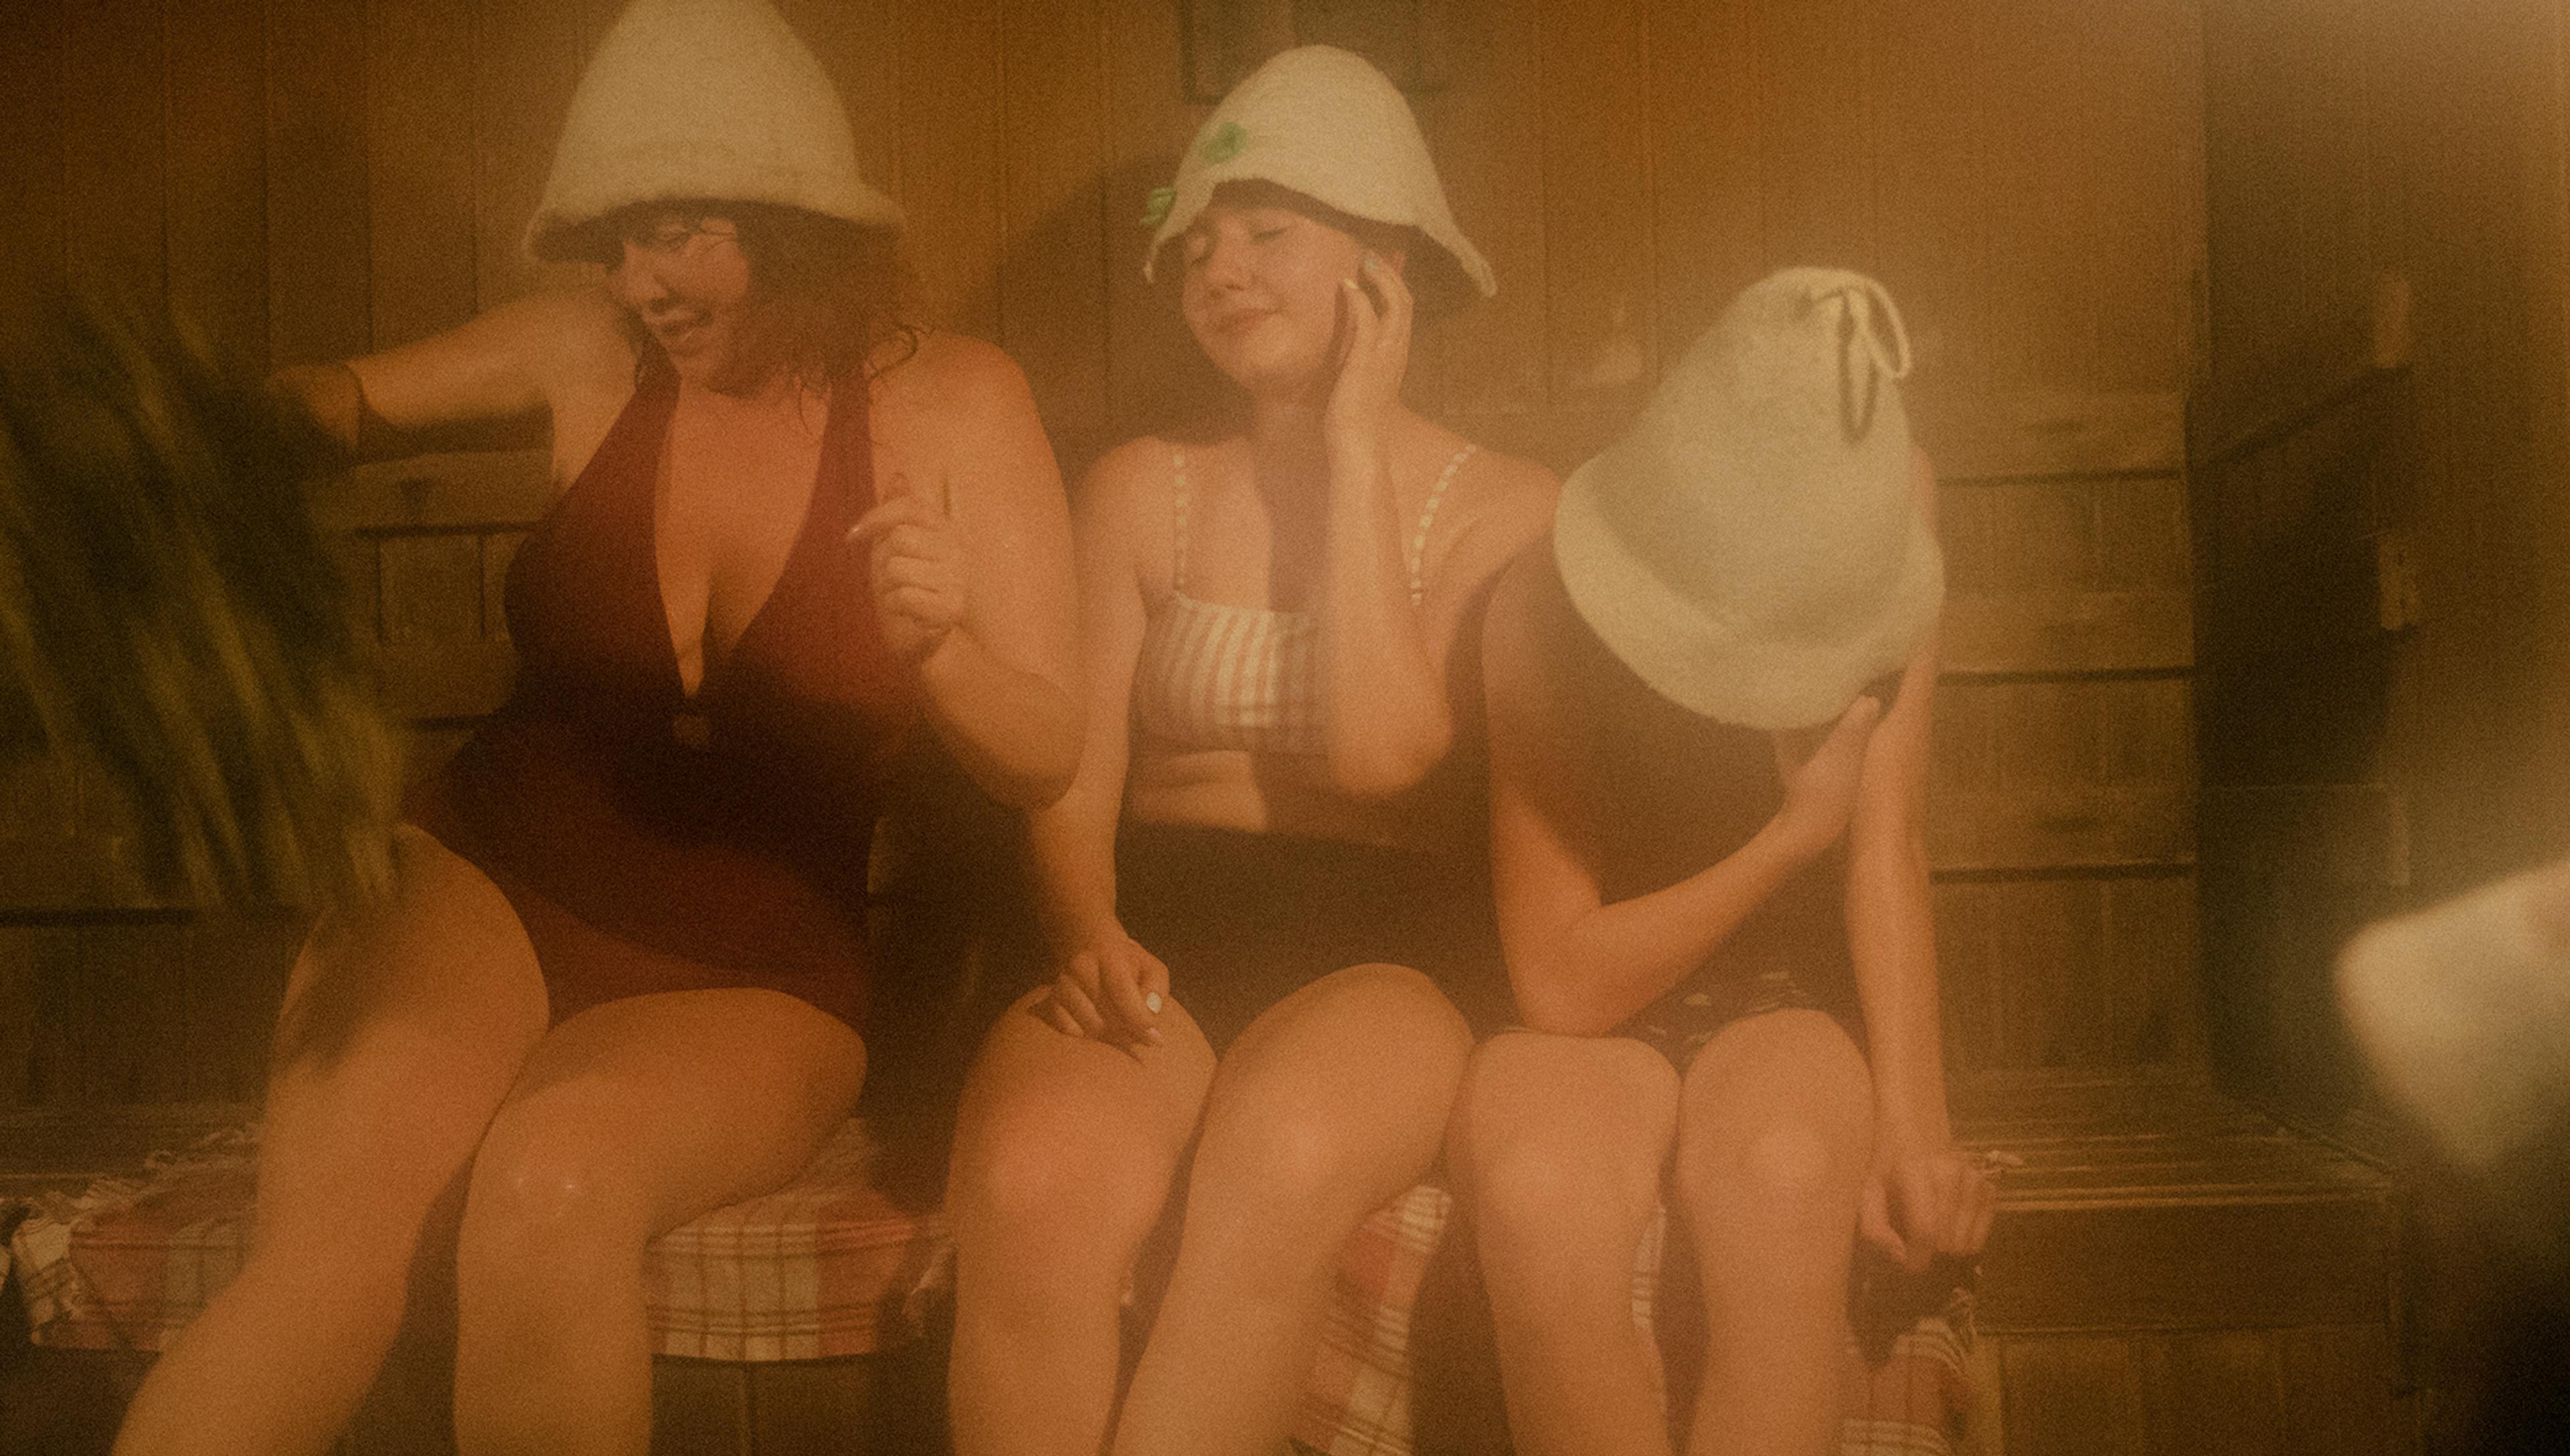 Three people wearing bathing suits and felt hats sit on a wooden bench in a sauna. The sauna is filled with steam, making the ambience hazy. The woman on the left is holding a bundle of twigs, likely for traditional sauna rituals. The mood appears relaxed and warm within the wooden interior.